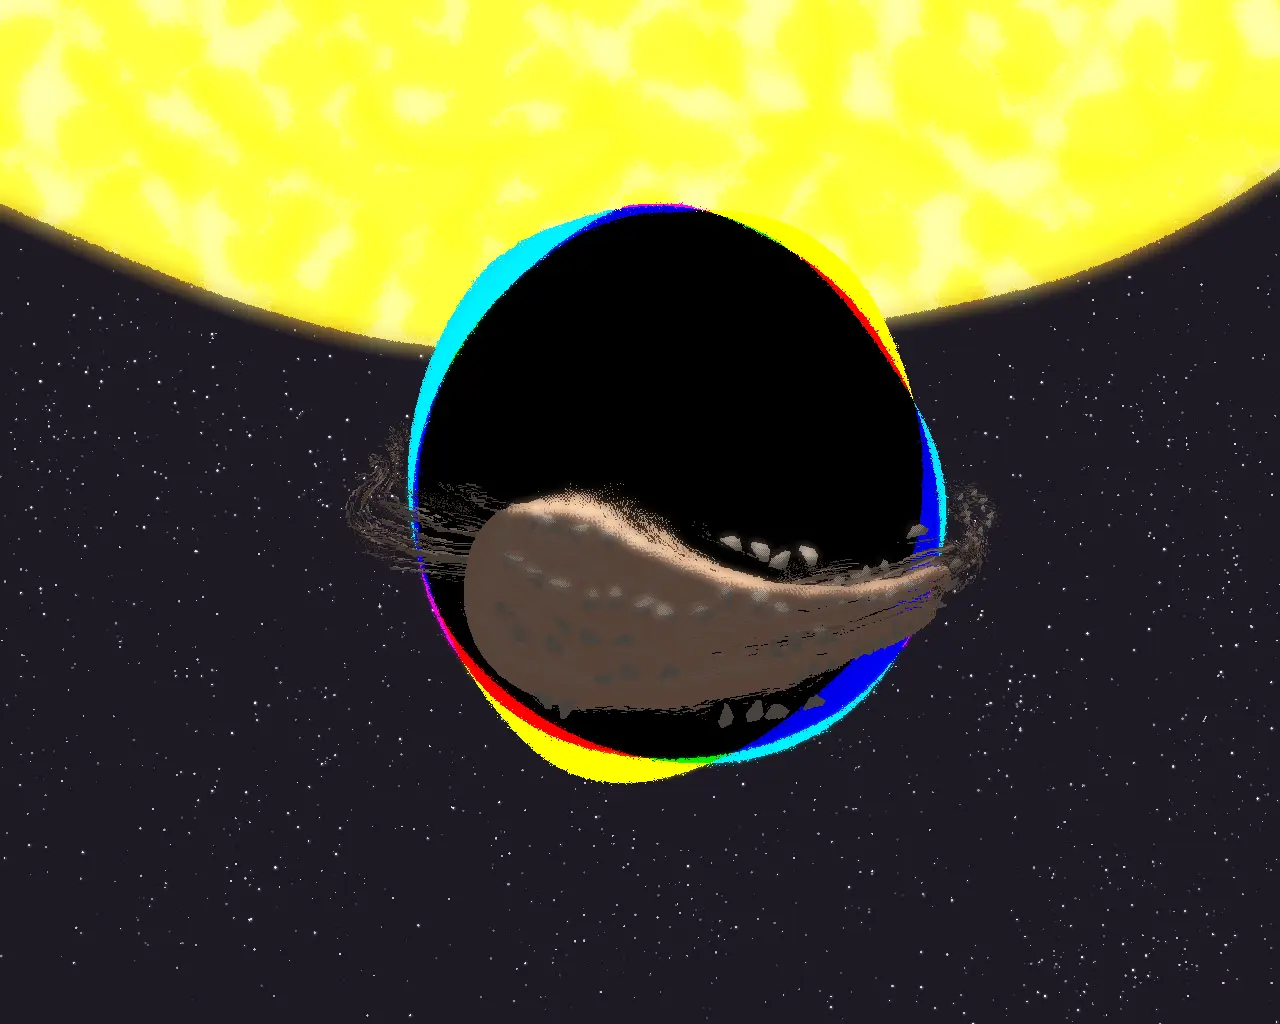 A planet being consumed by a black hole, in front of a star